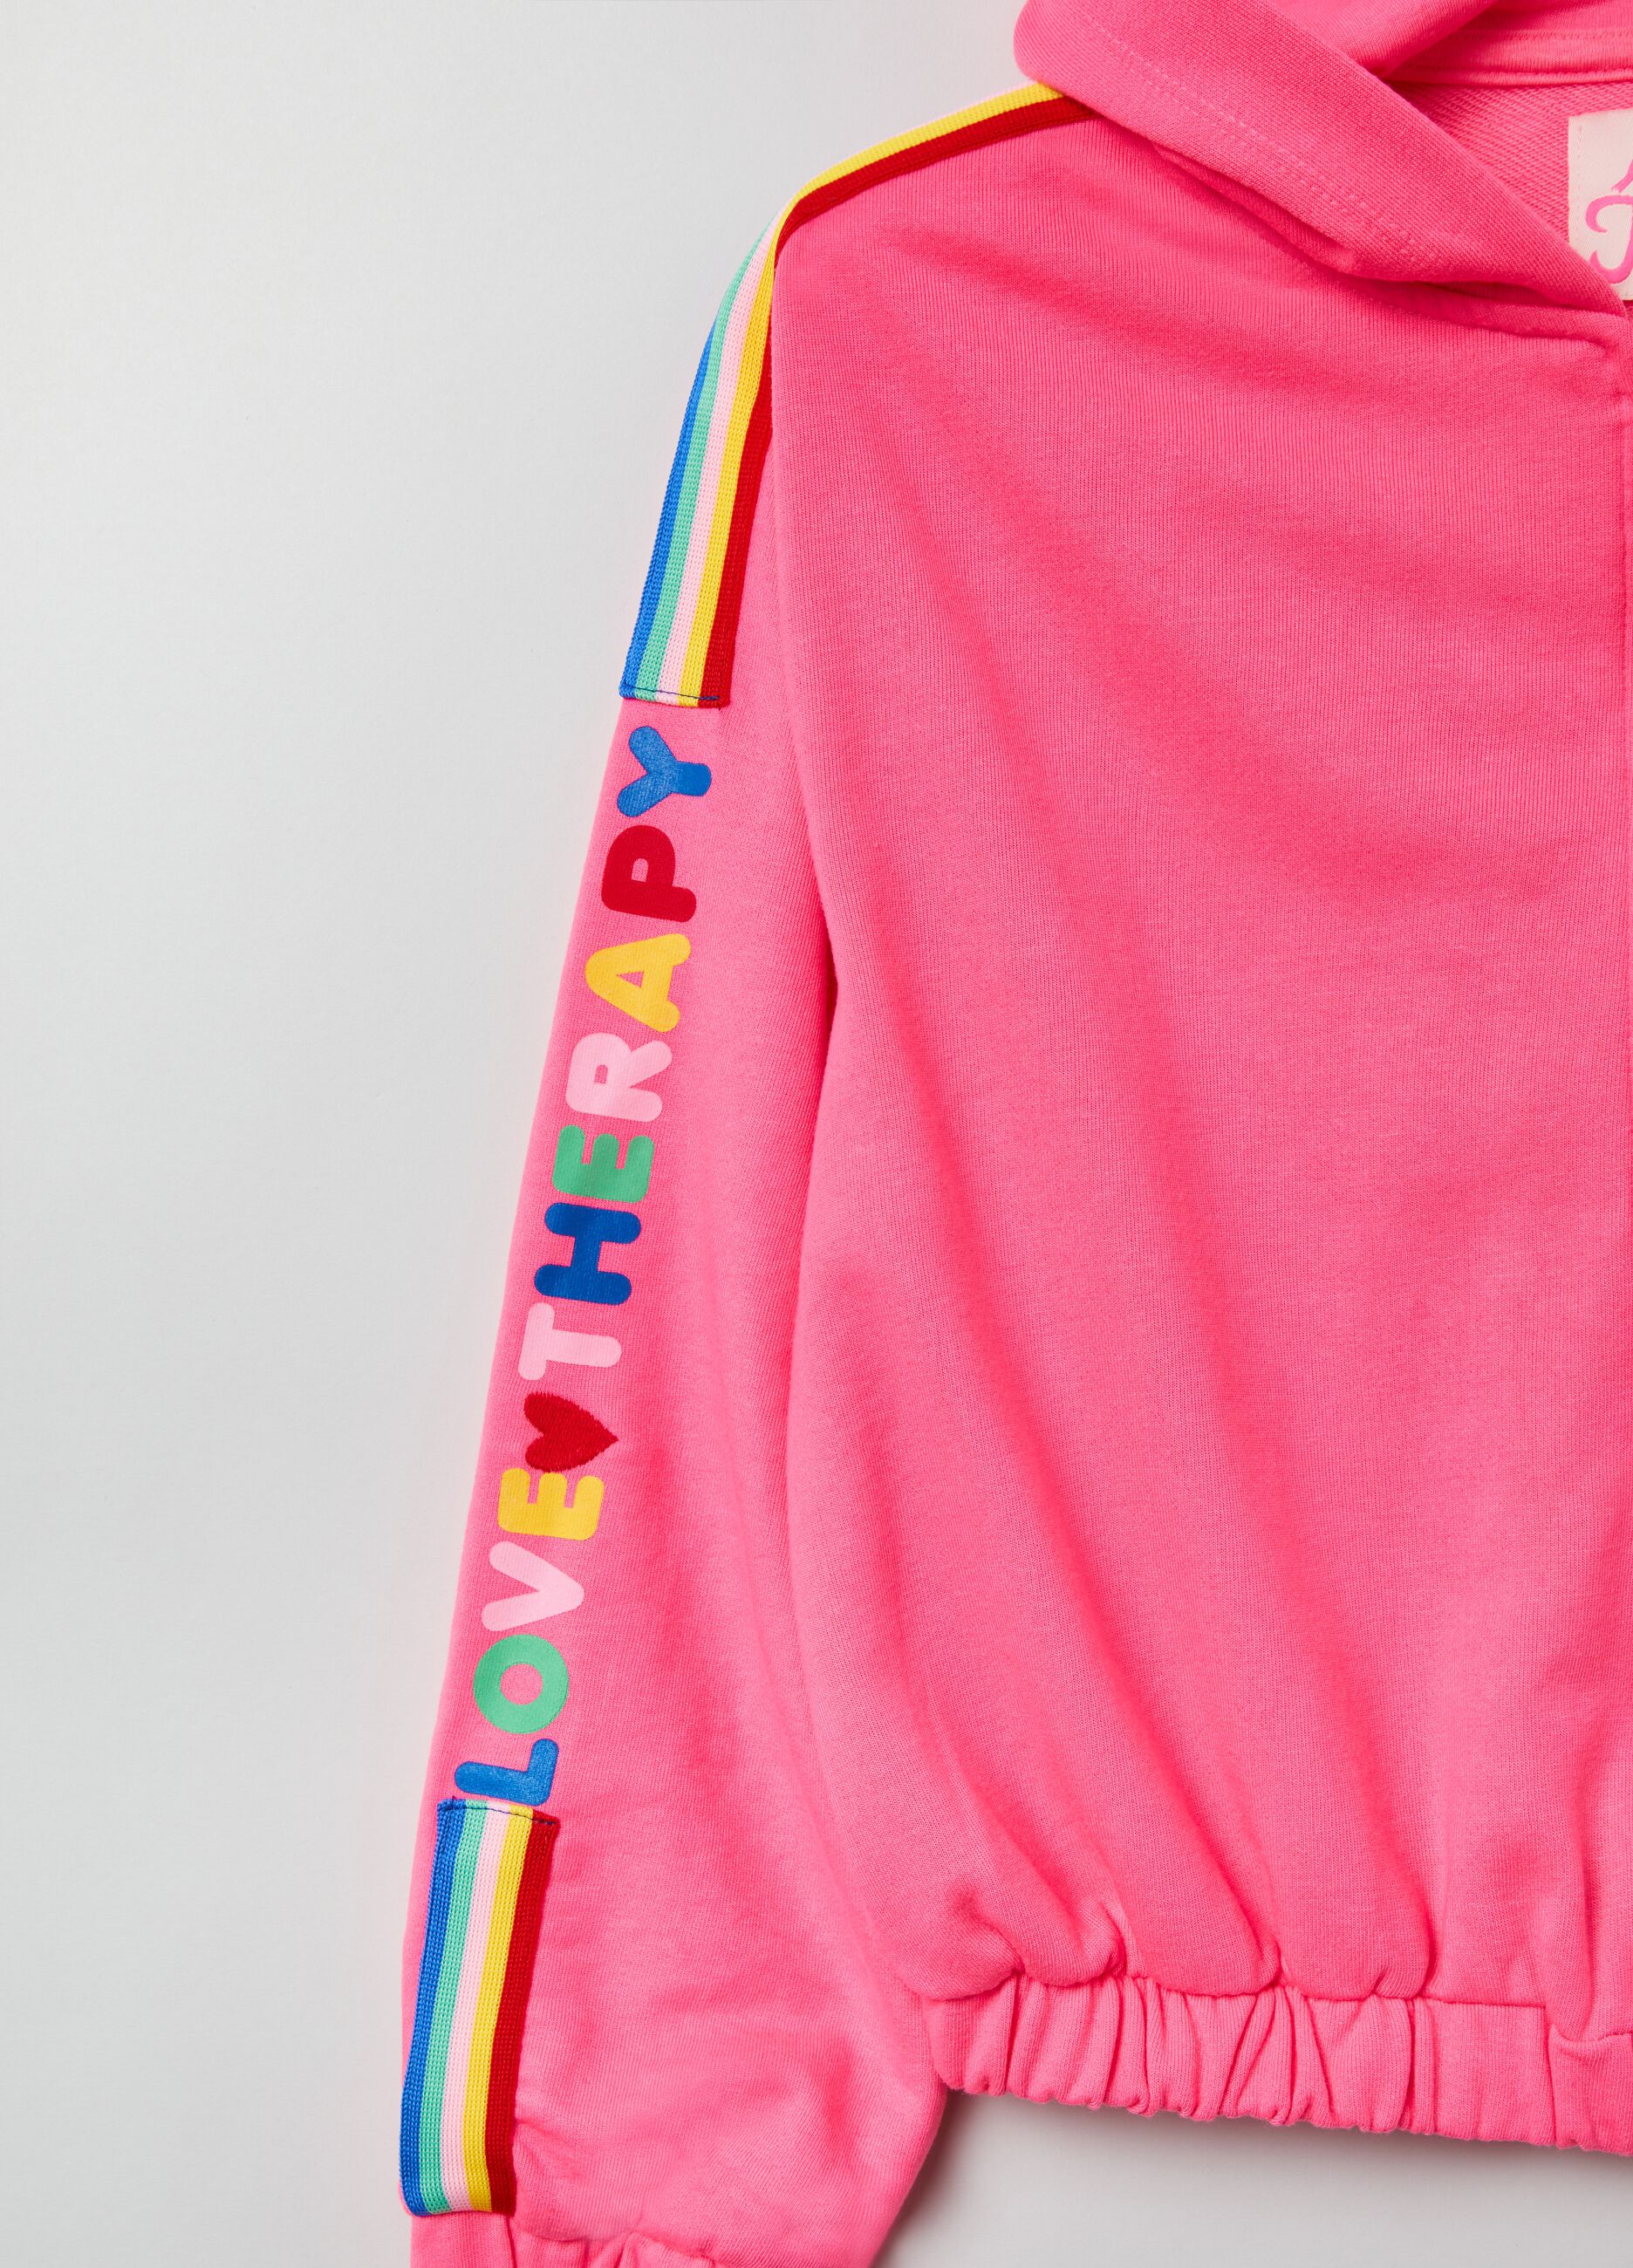 Full-zip sweatshirt with hood and Love Therapy print